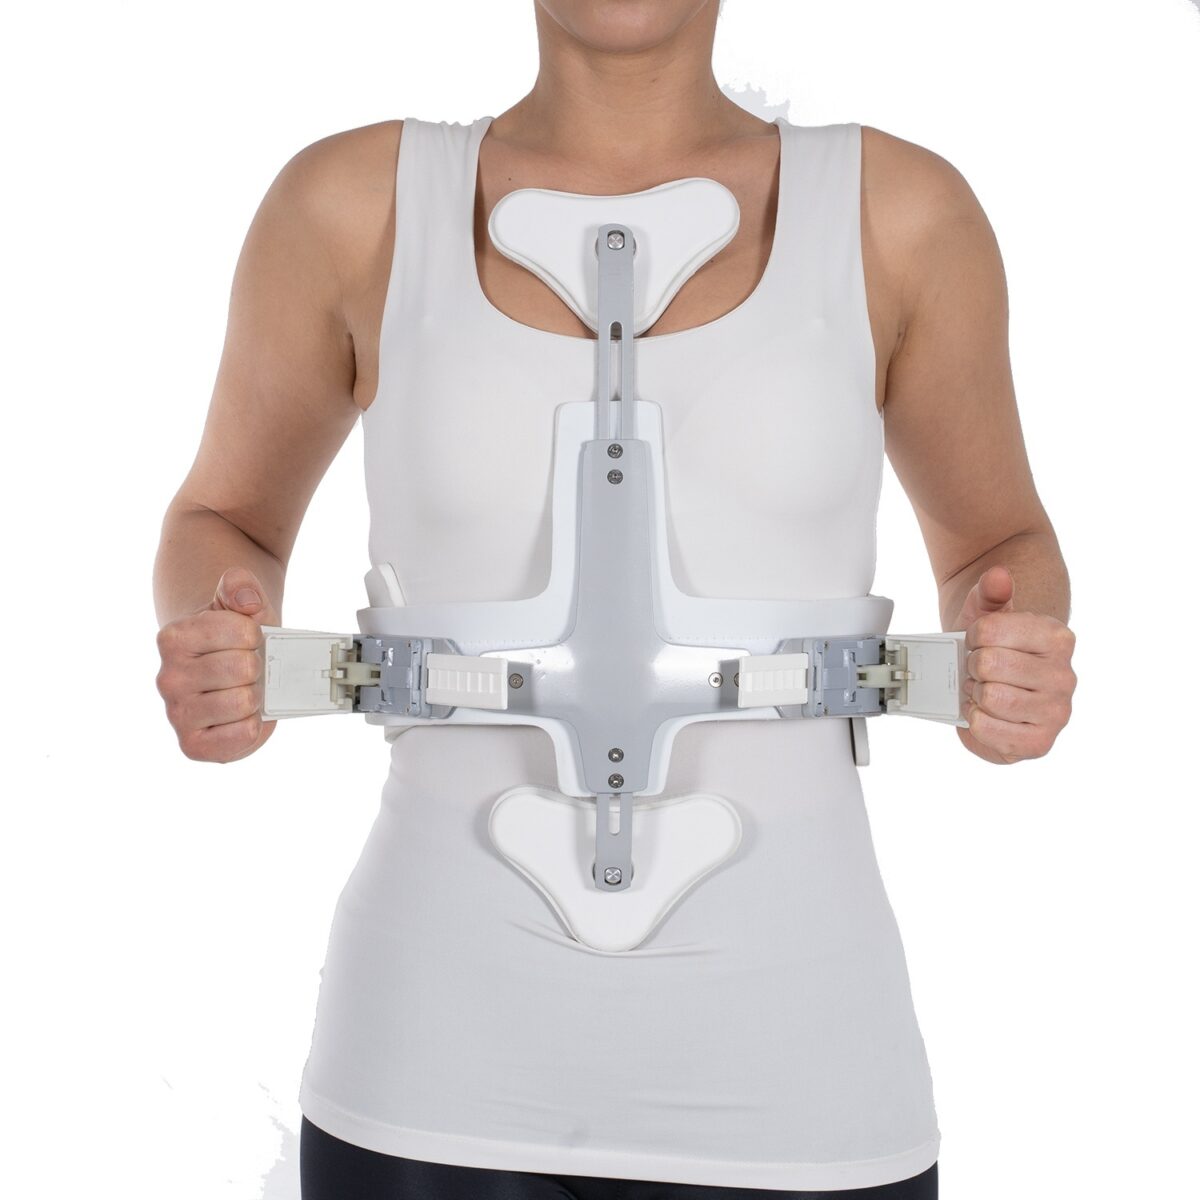 wingmed orthopedic equipments W449 hiperextension corset 3 points 70